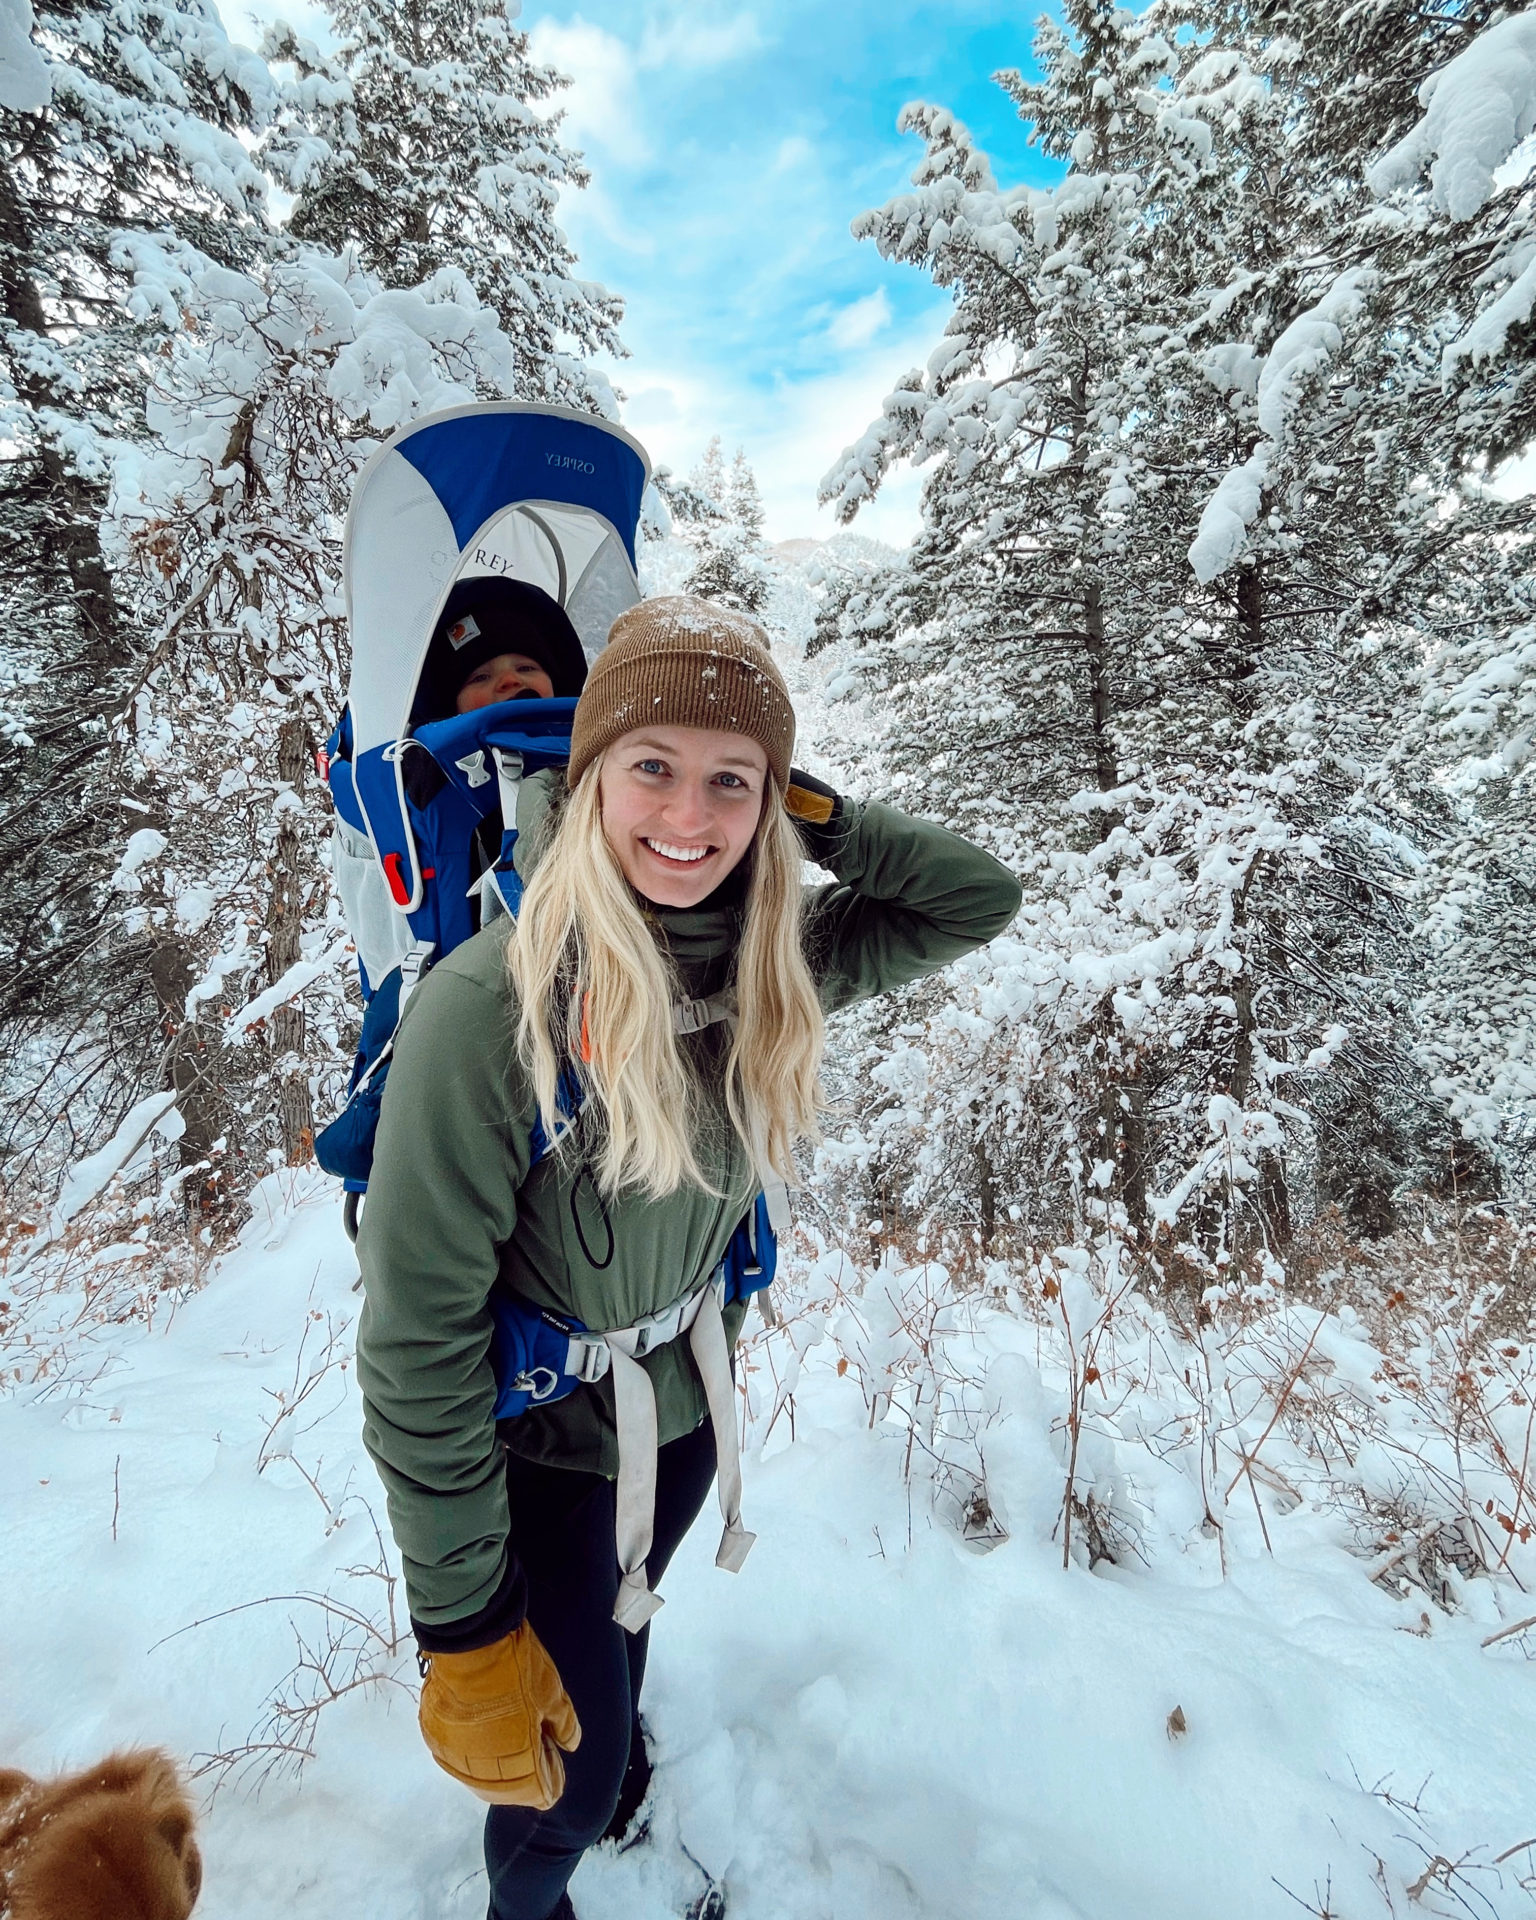 Ultimate Guide to Winter Hiking Outfits - Outdoors, Nature, Hunting, and  Camping